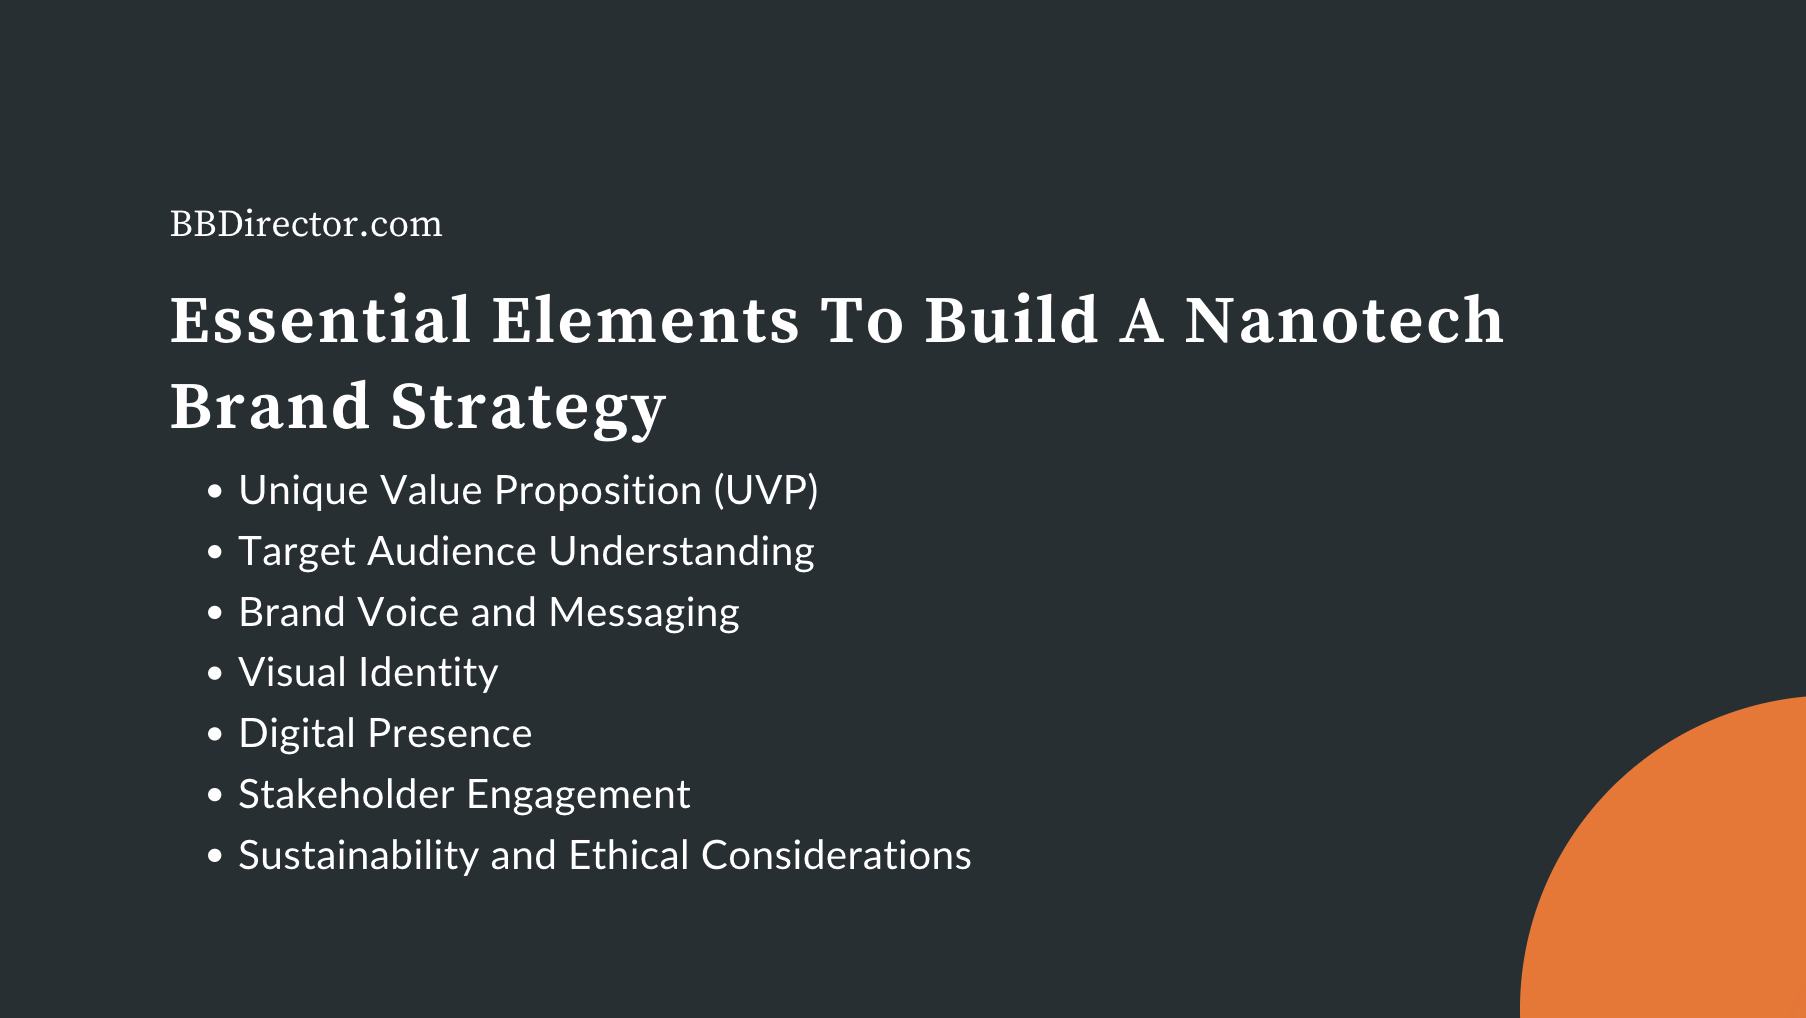 Essential Elements To Build A Nanotech Brand Strategy: Branding Strategy Guide for Nanotechnology